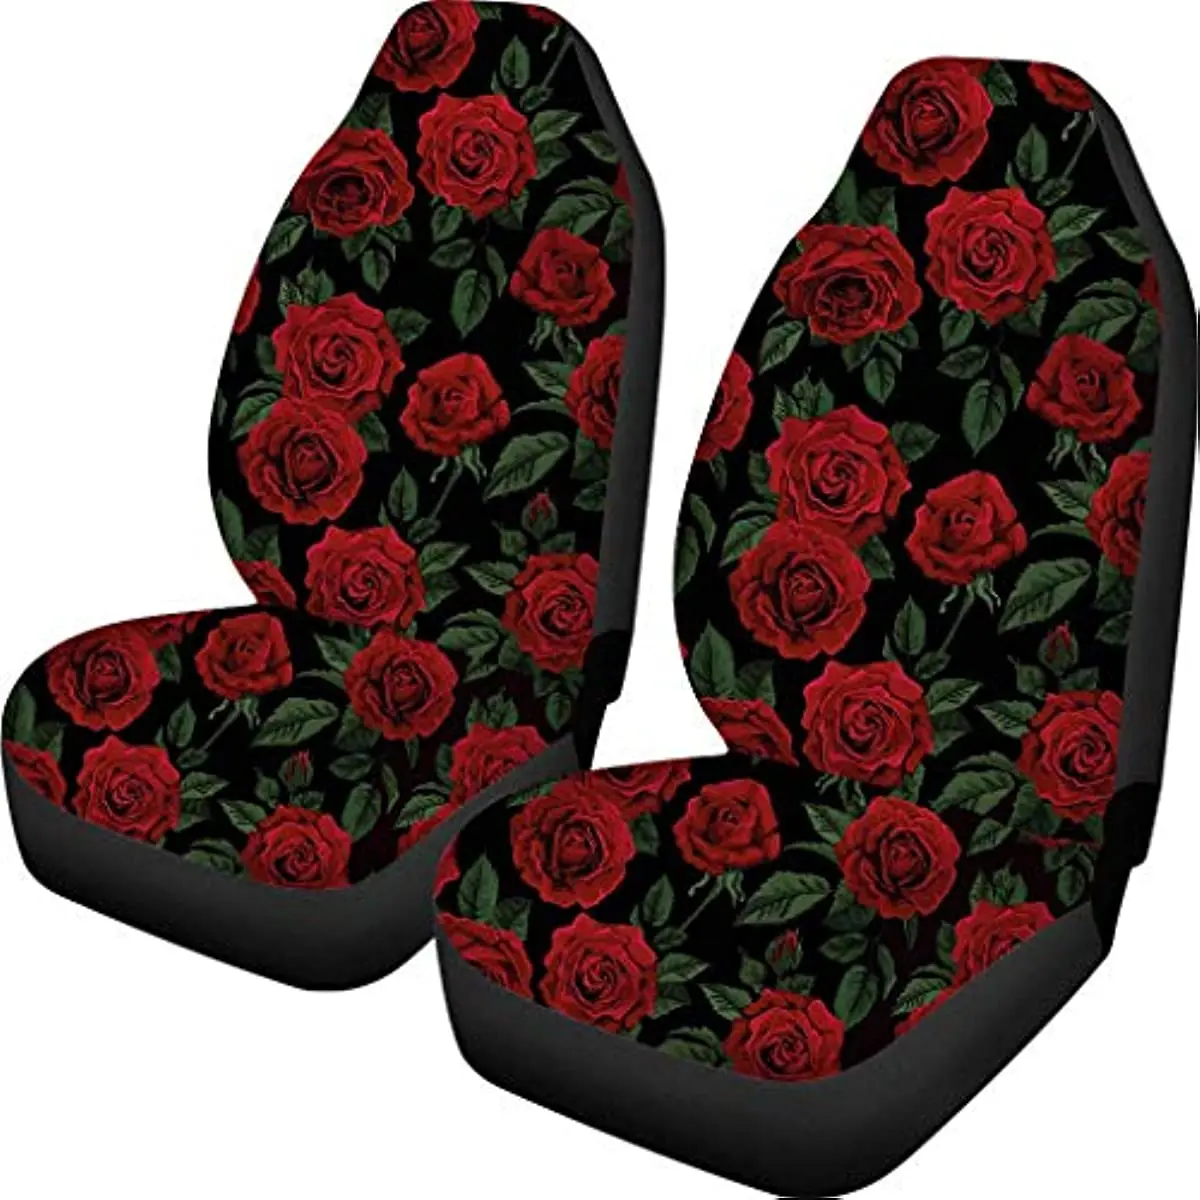 

Caroiem Automotive Seat Cover Romantic Red Rose Print Front Seat Cover Pack of 2,Car,Van,Truck Decor for Women,Interior Protecti